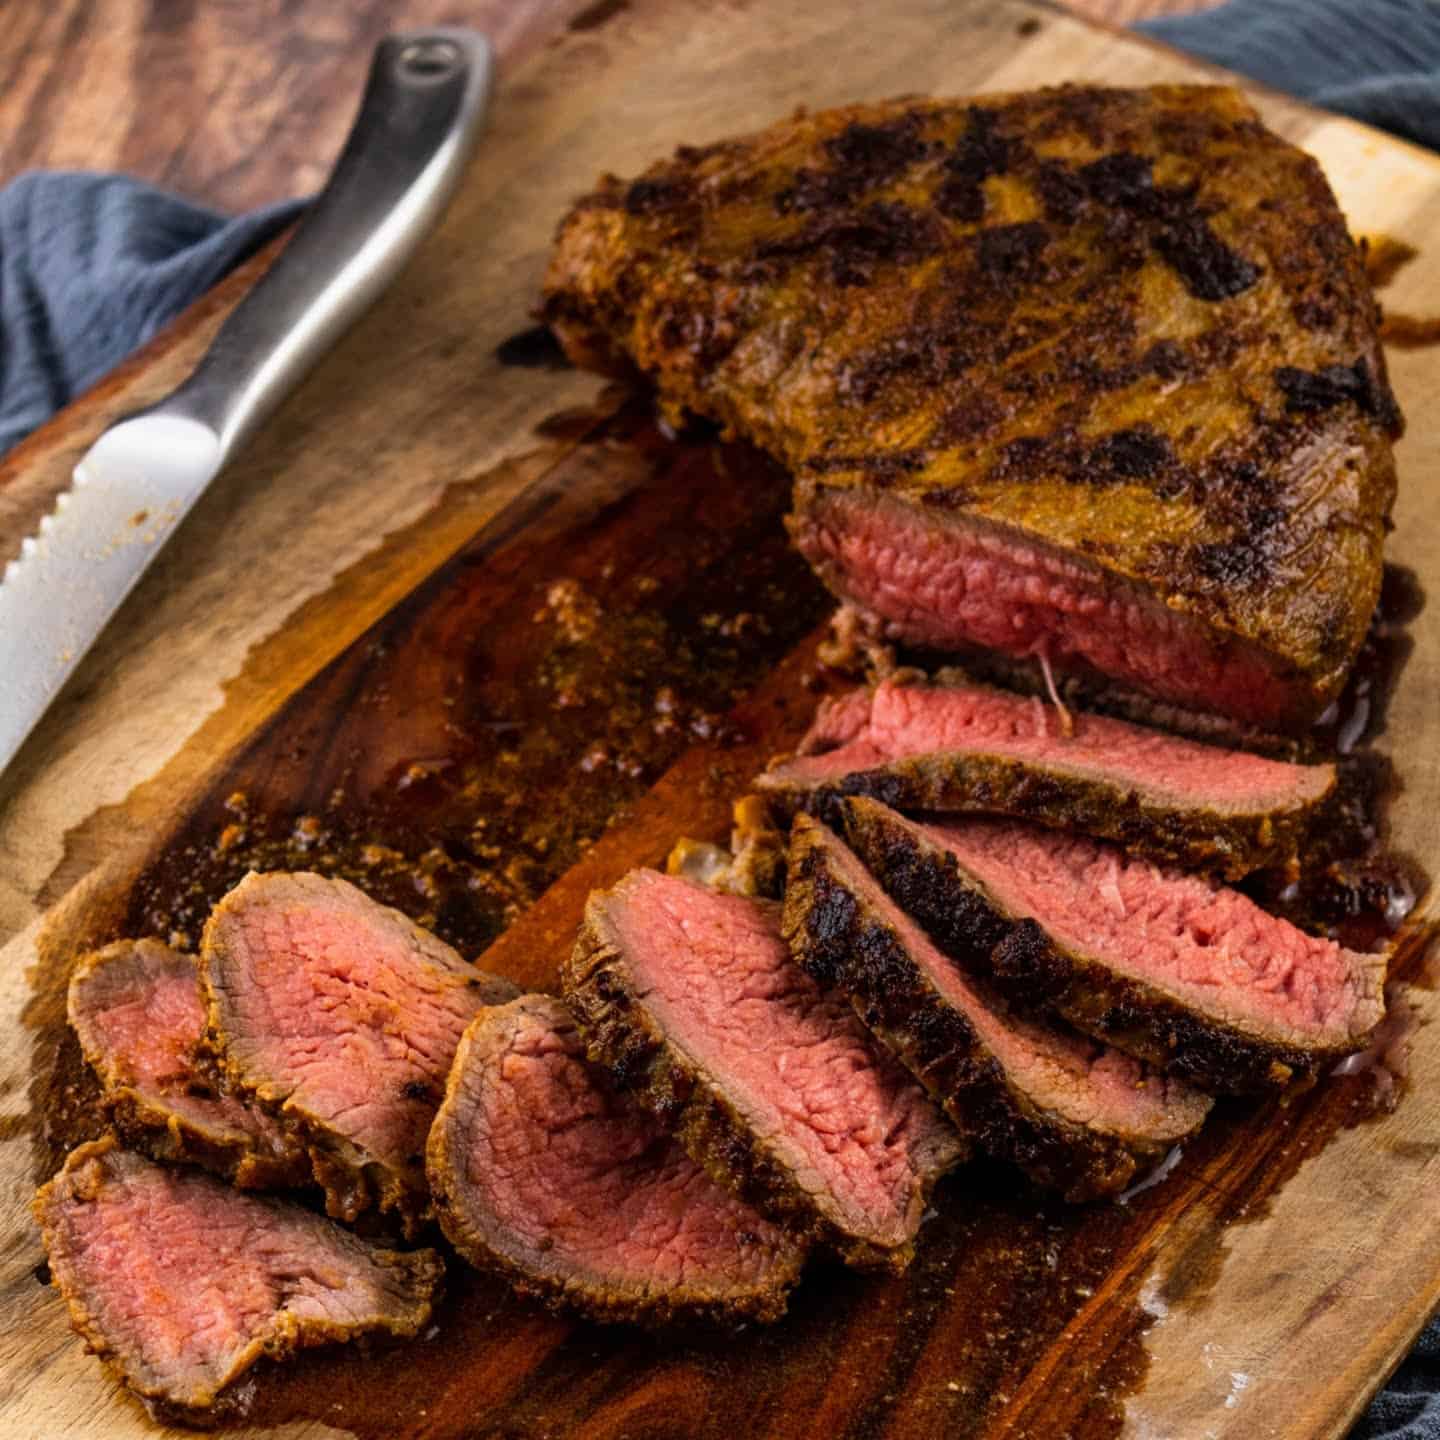 how to cook tri tip in the oven